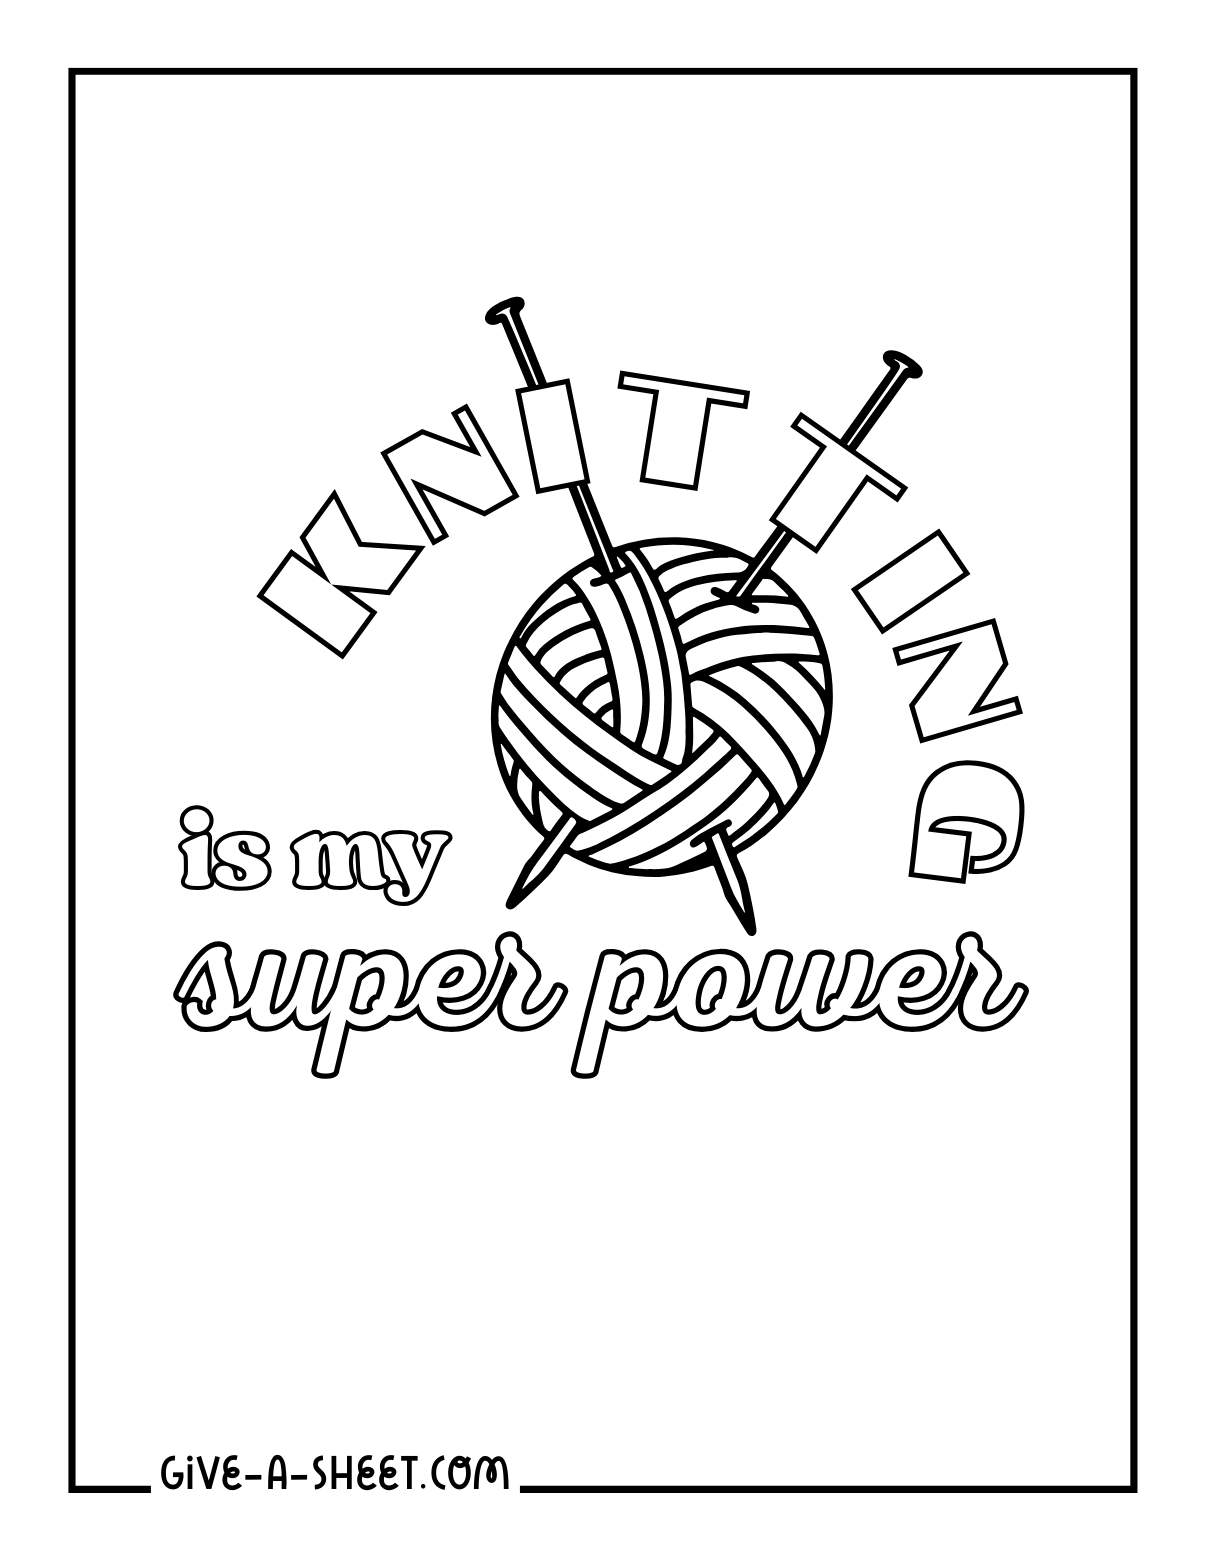 Fiber arts and knitting needle coloring page.